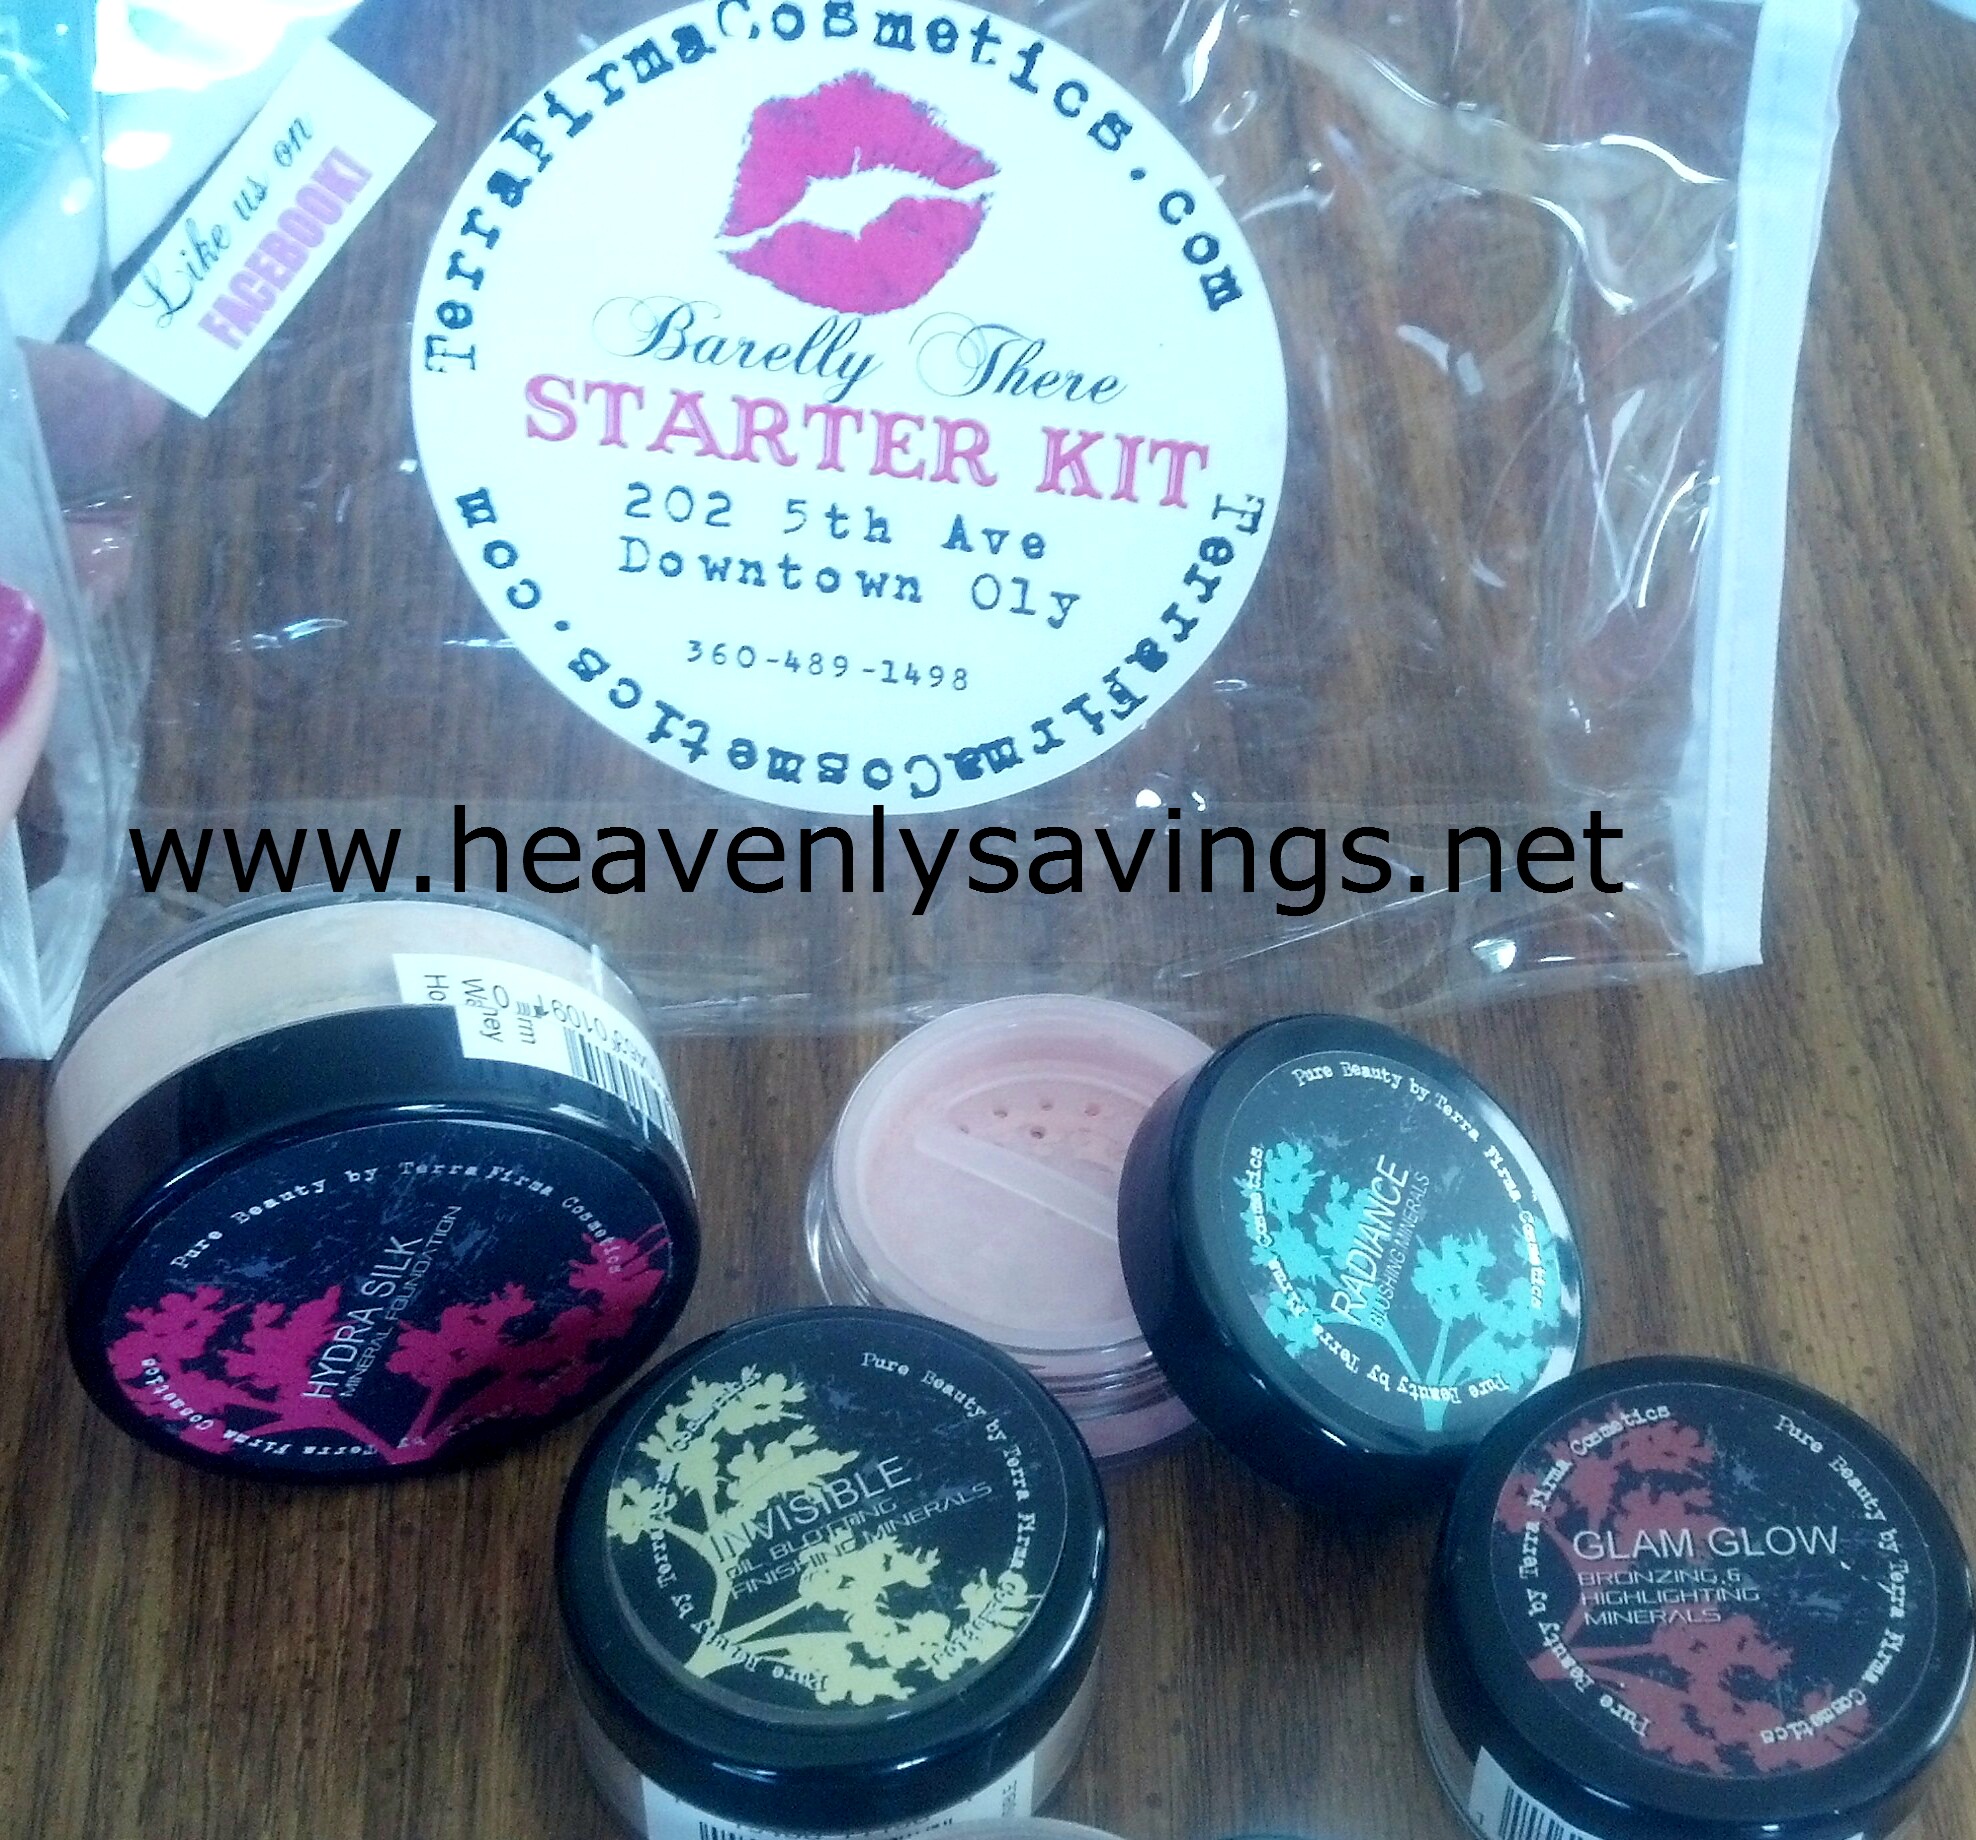 Terra Firma Cosmetics Review and Giveaway Ends 6/1/13!